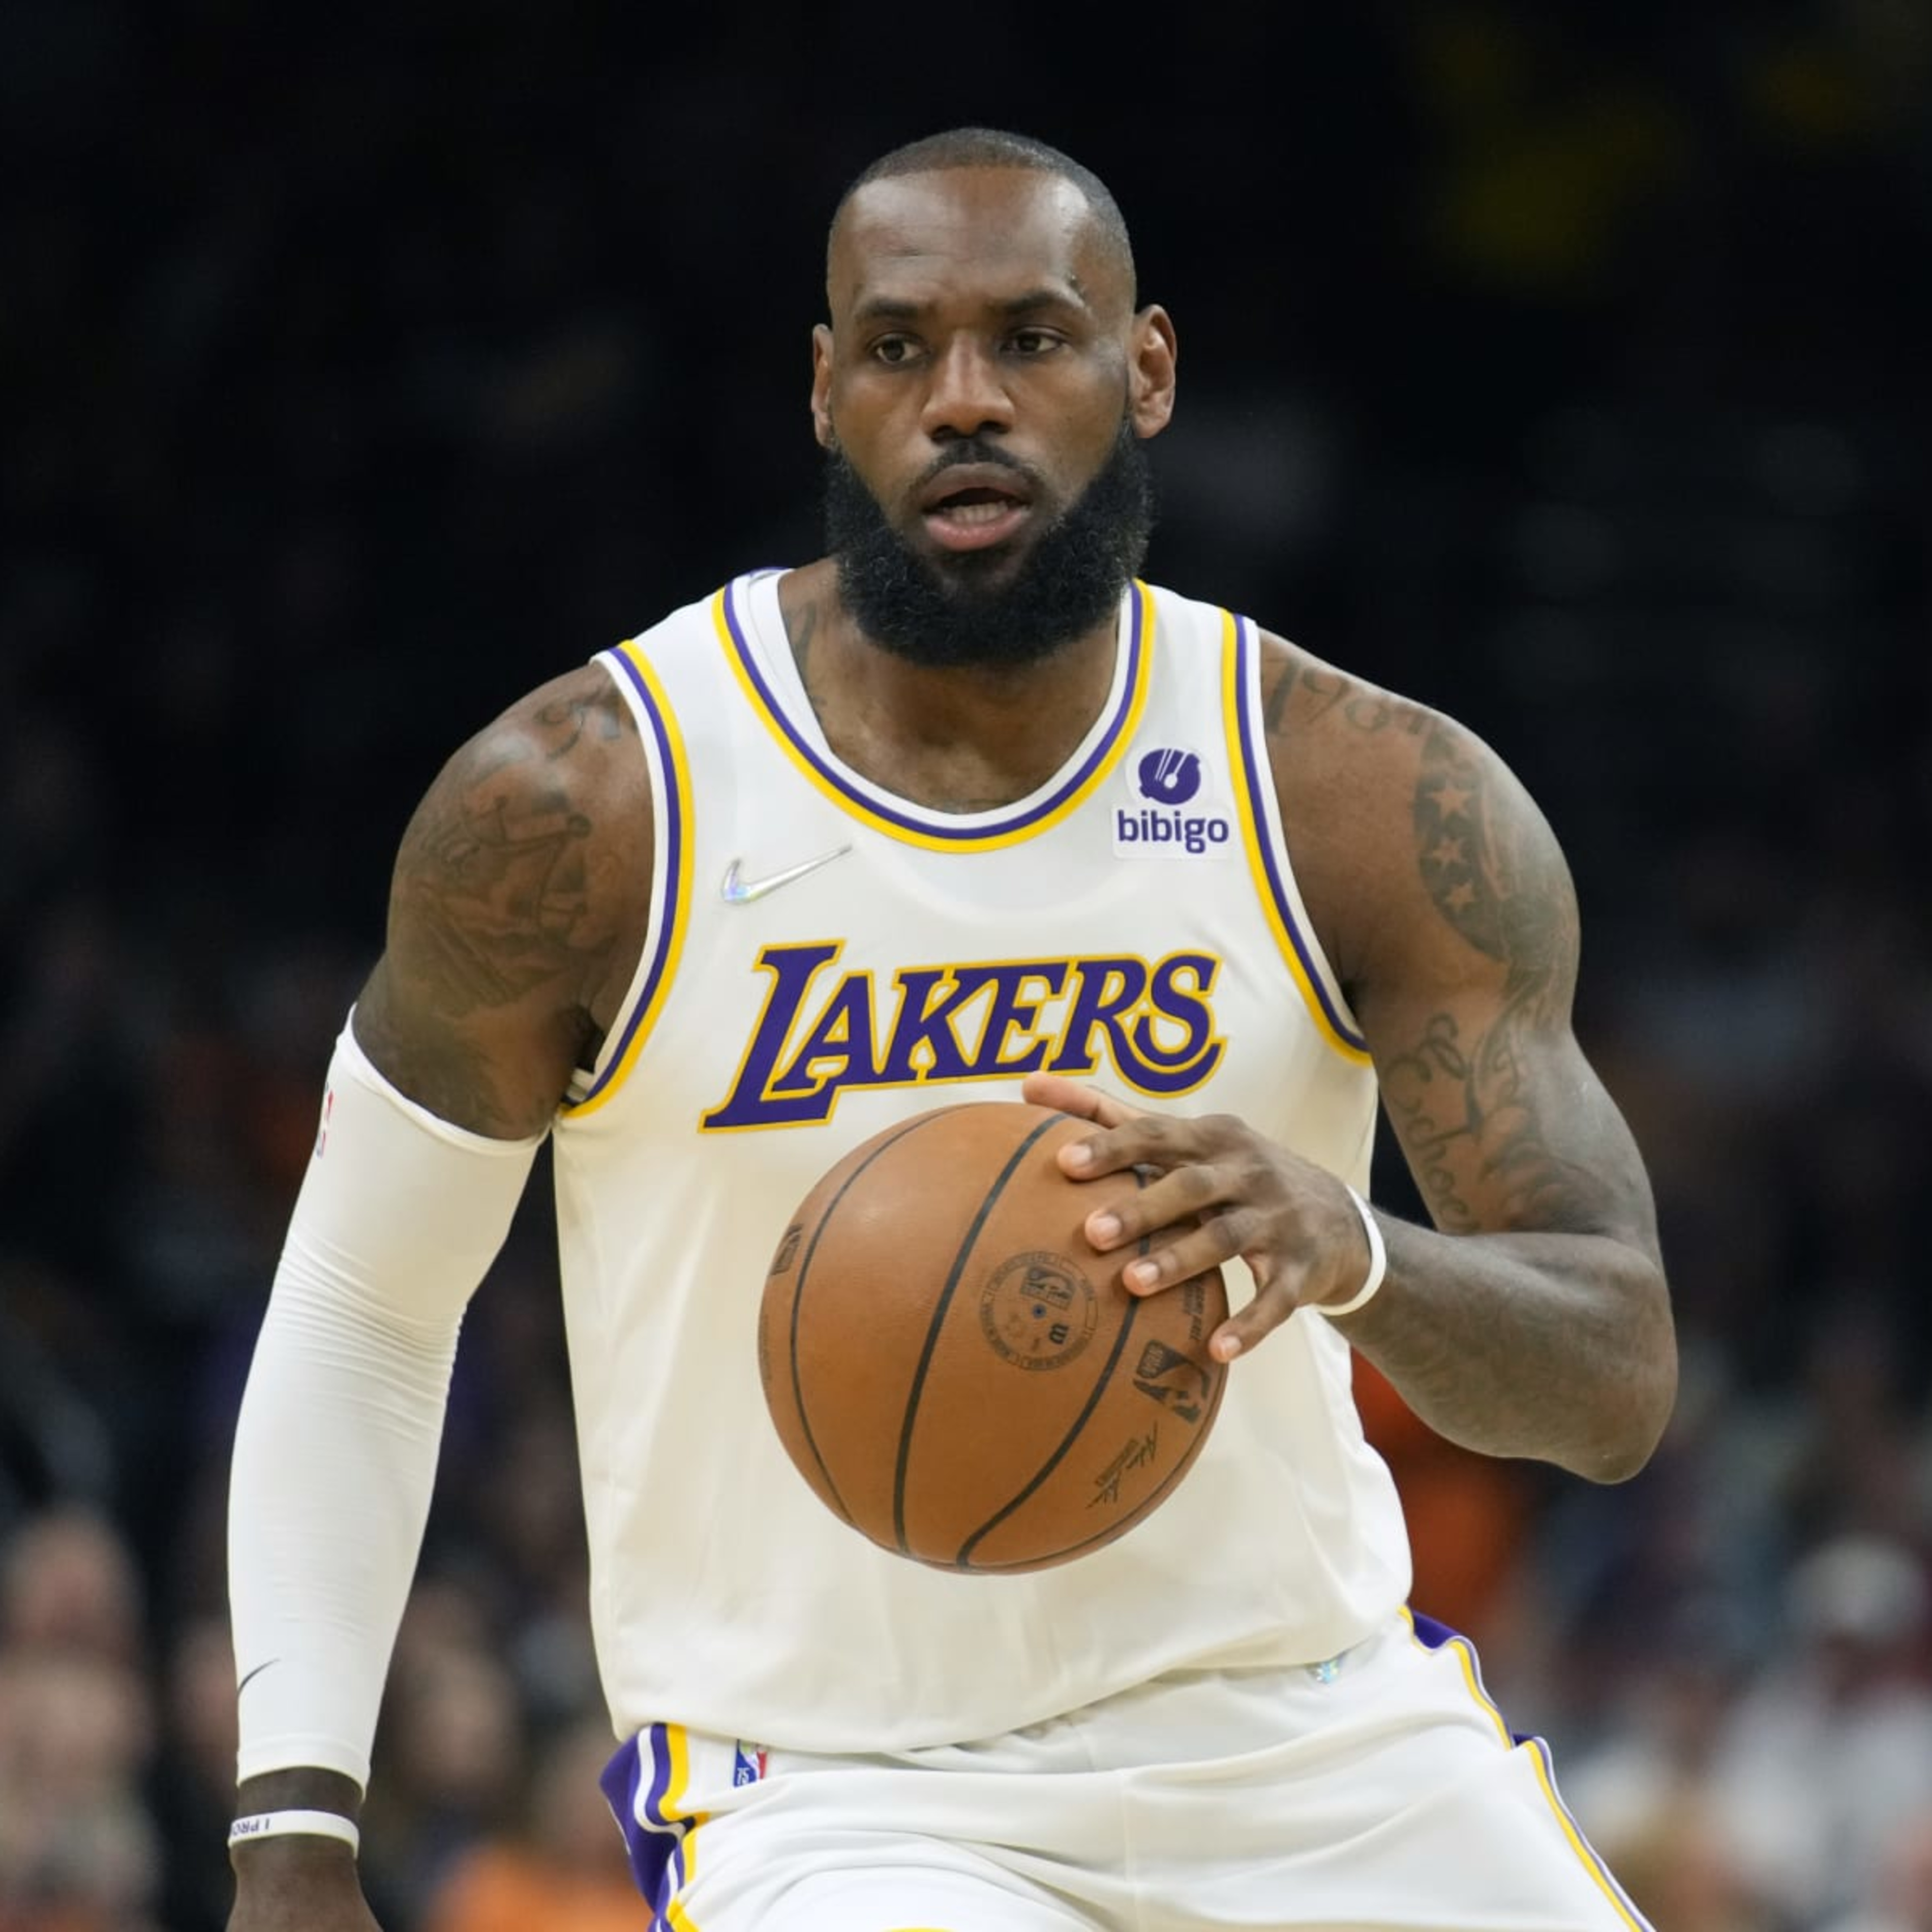 Lakers’ LeBron James to Take Part in Drew League for 1st Time Since 2011